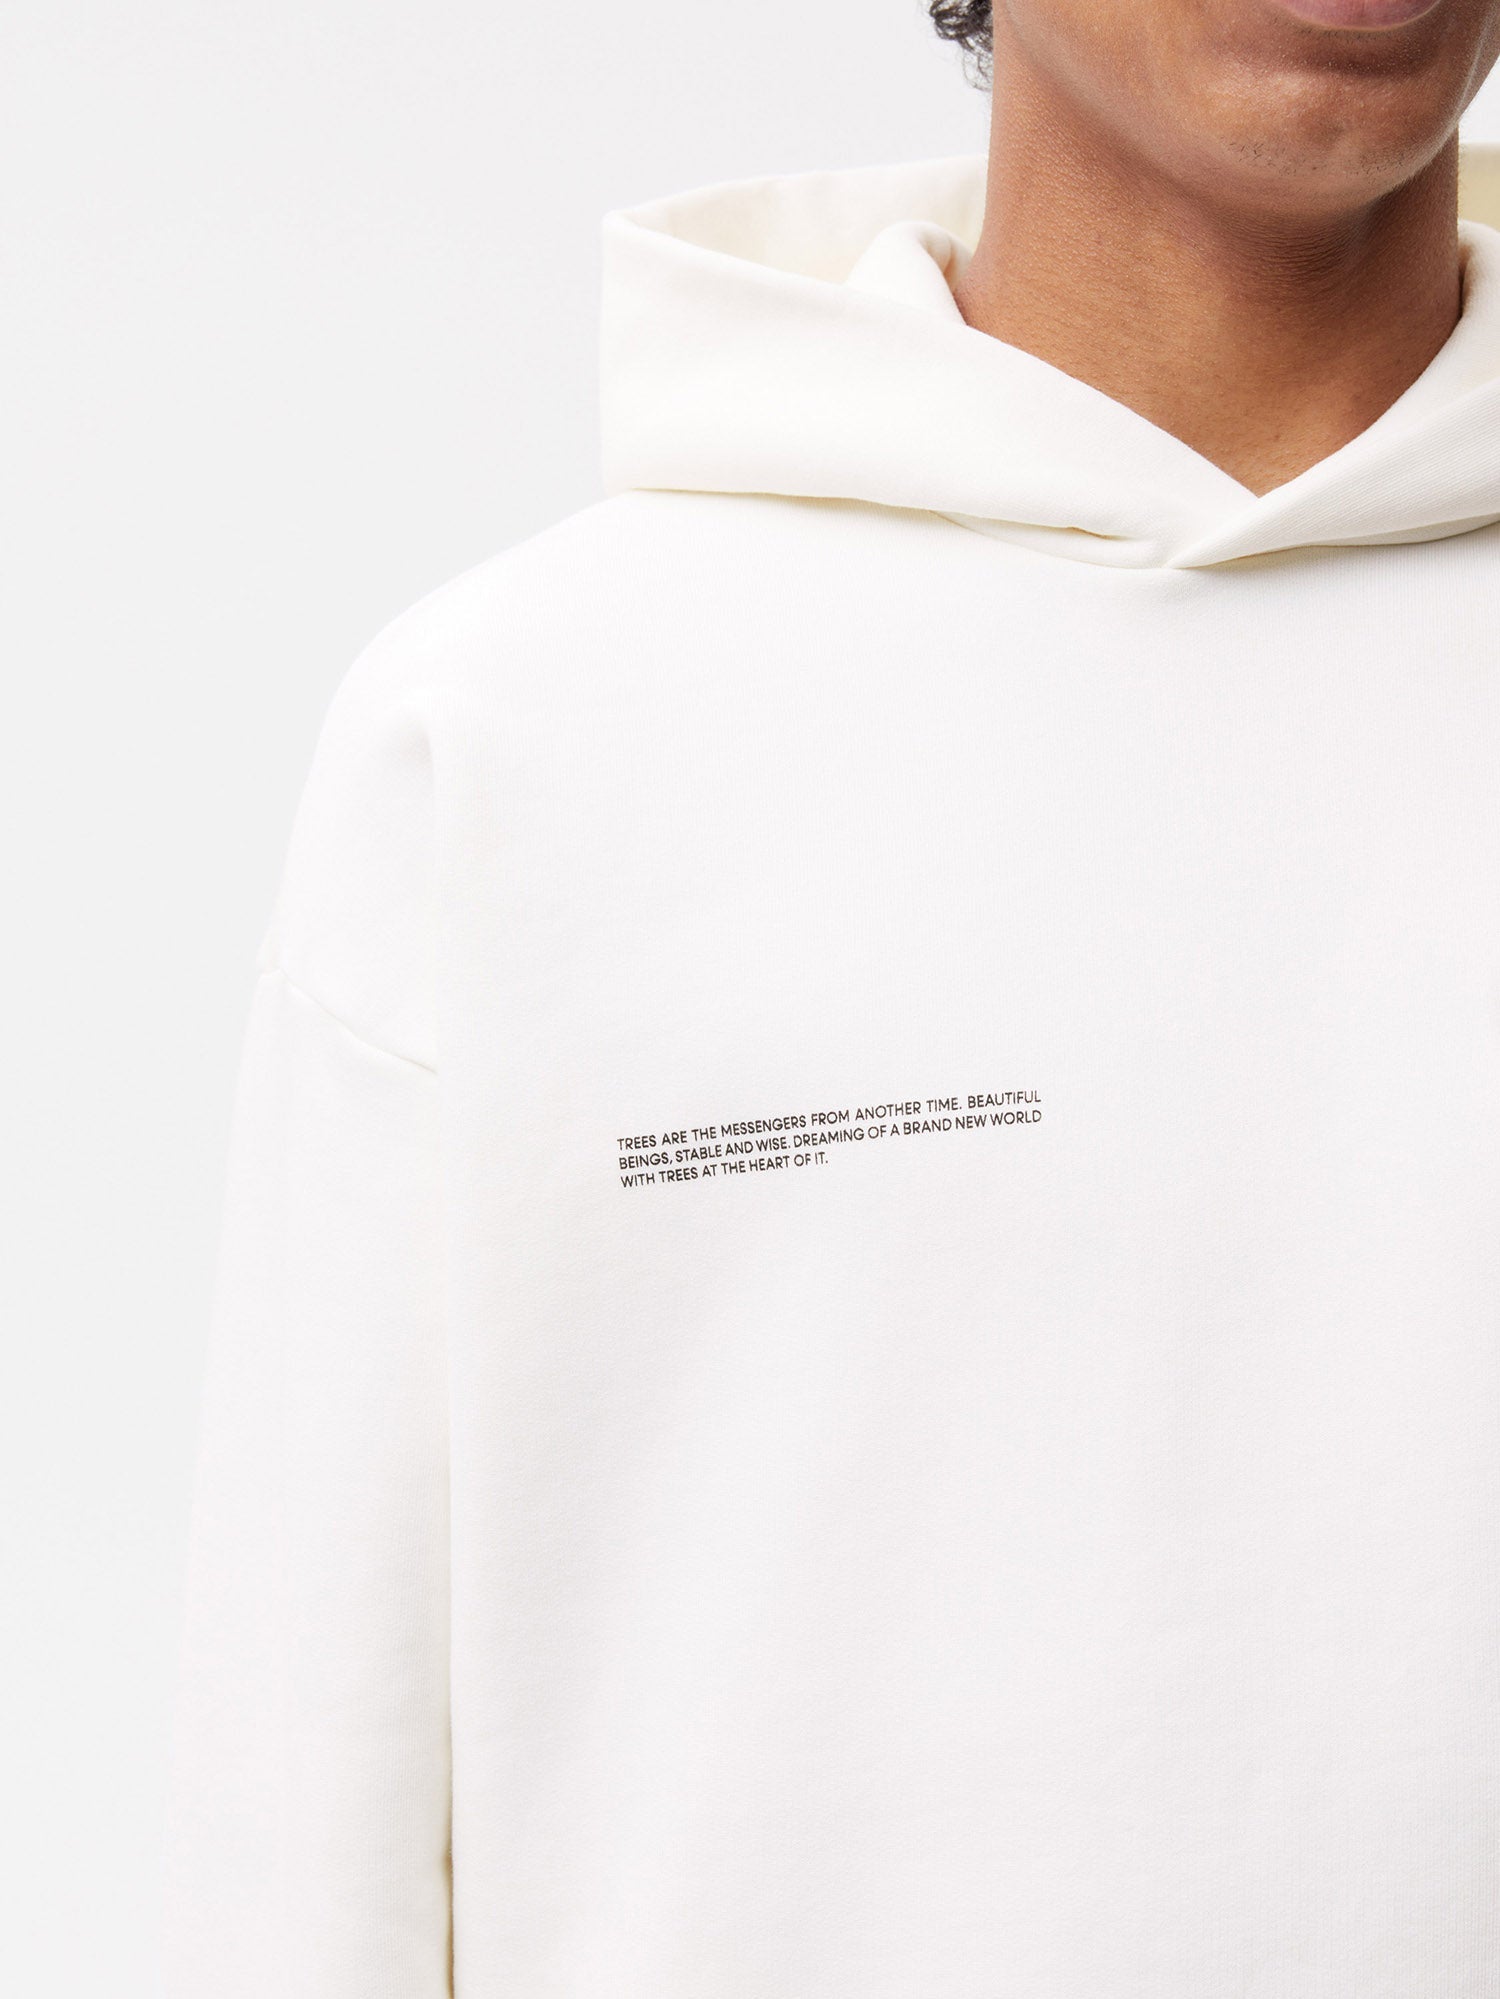 Pangaia-Kenny-Scharf-365-Signature-Hoodie-Swamp-Style-Off-White-Male-2